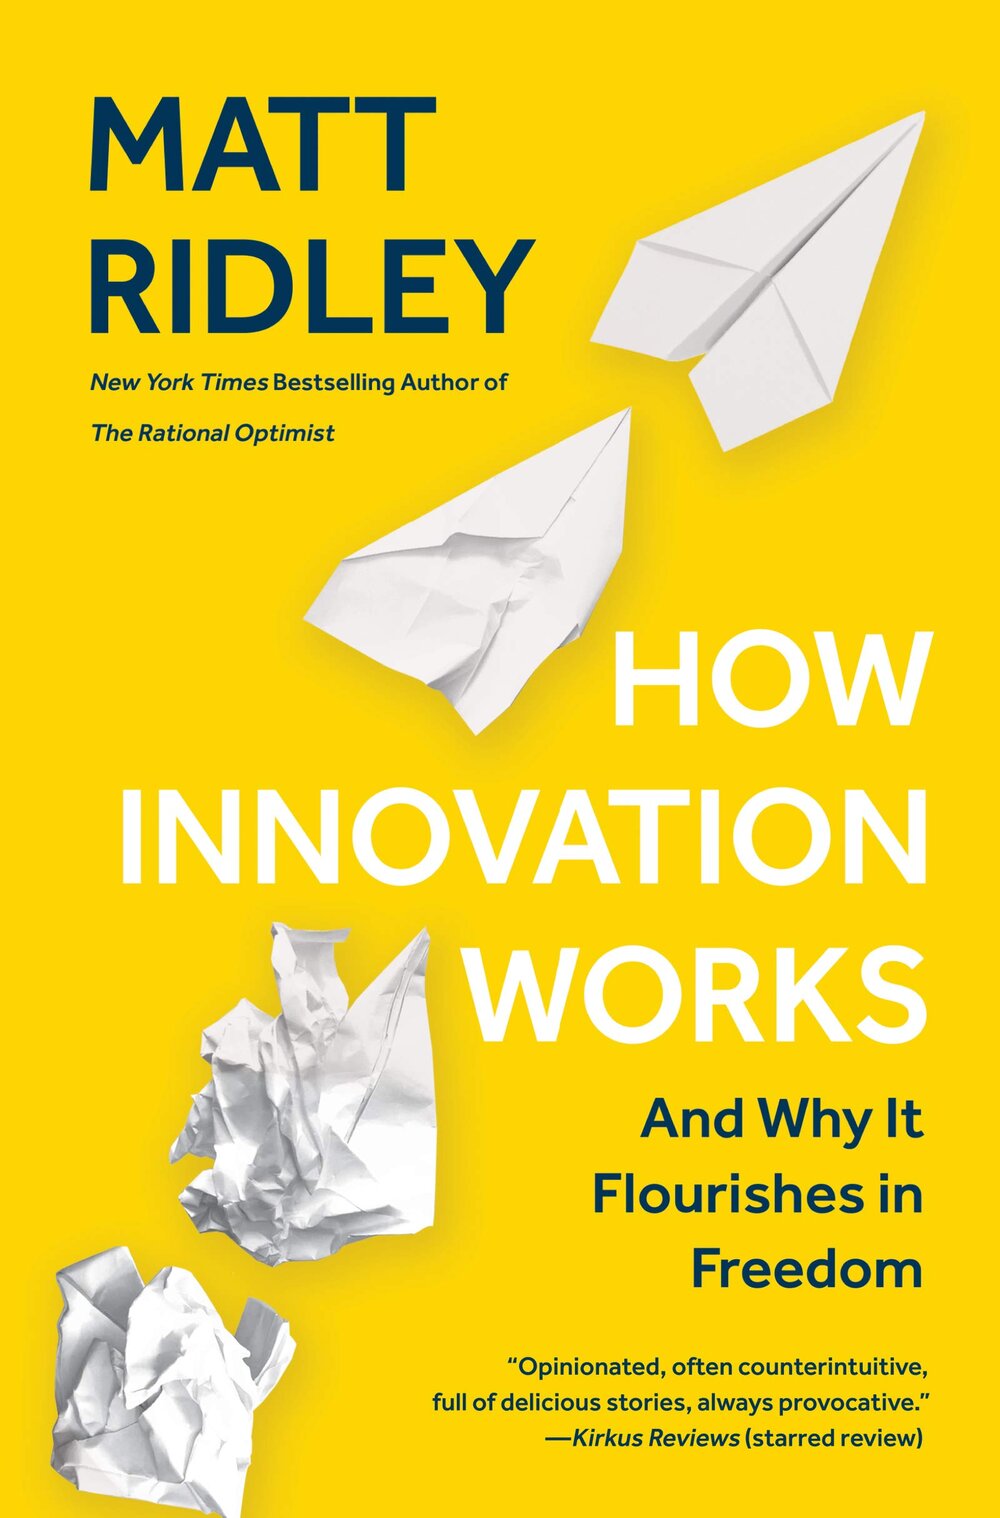 How Innovation Works And Why It Flourishes in Freedom by Matt Ridley